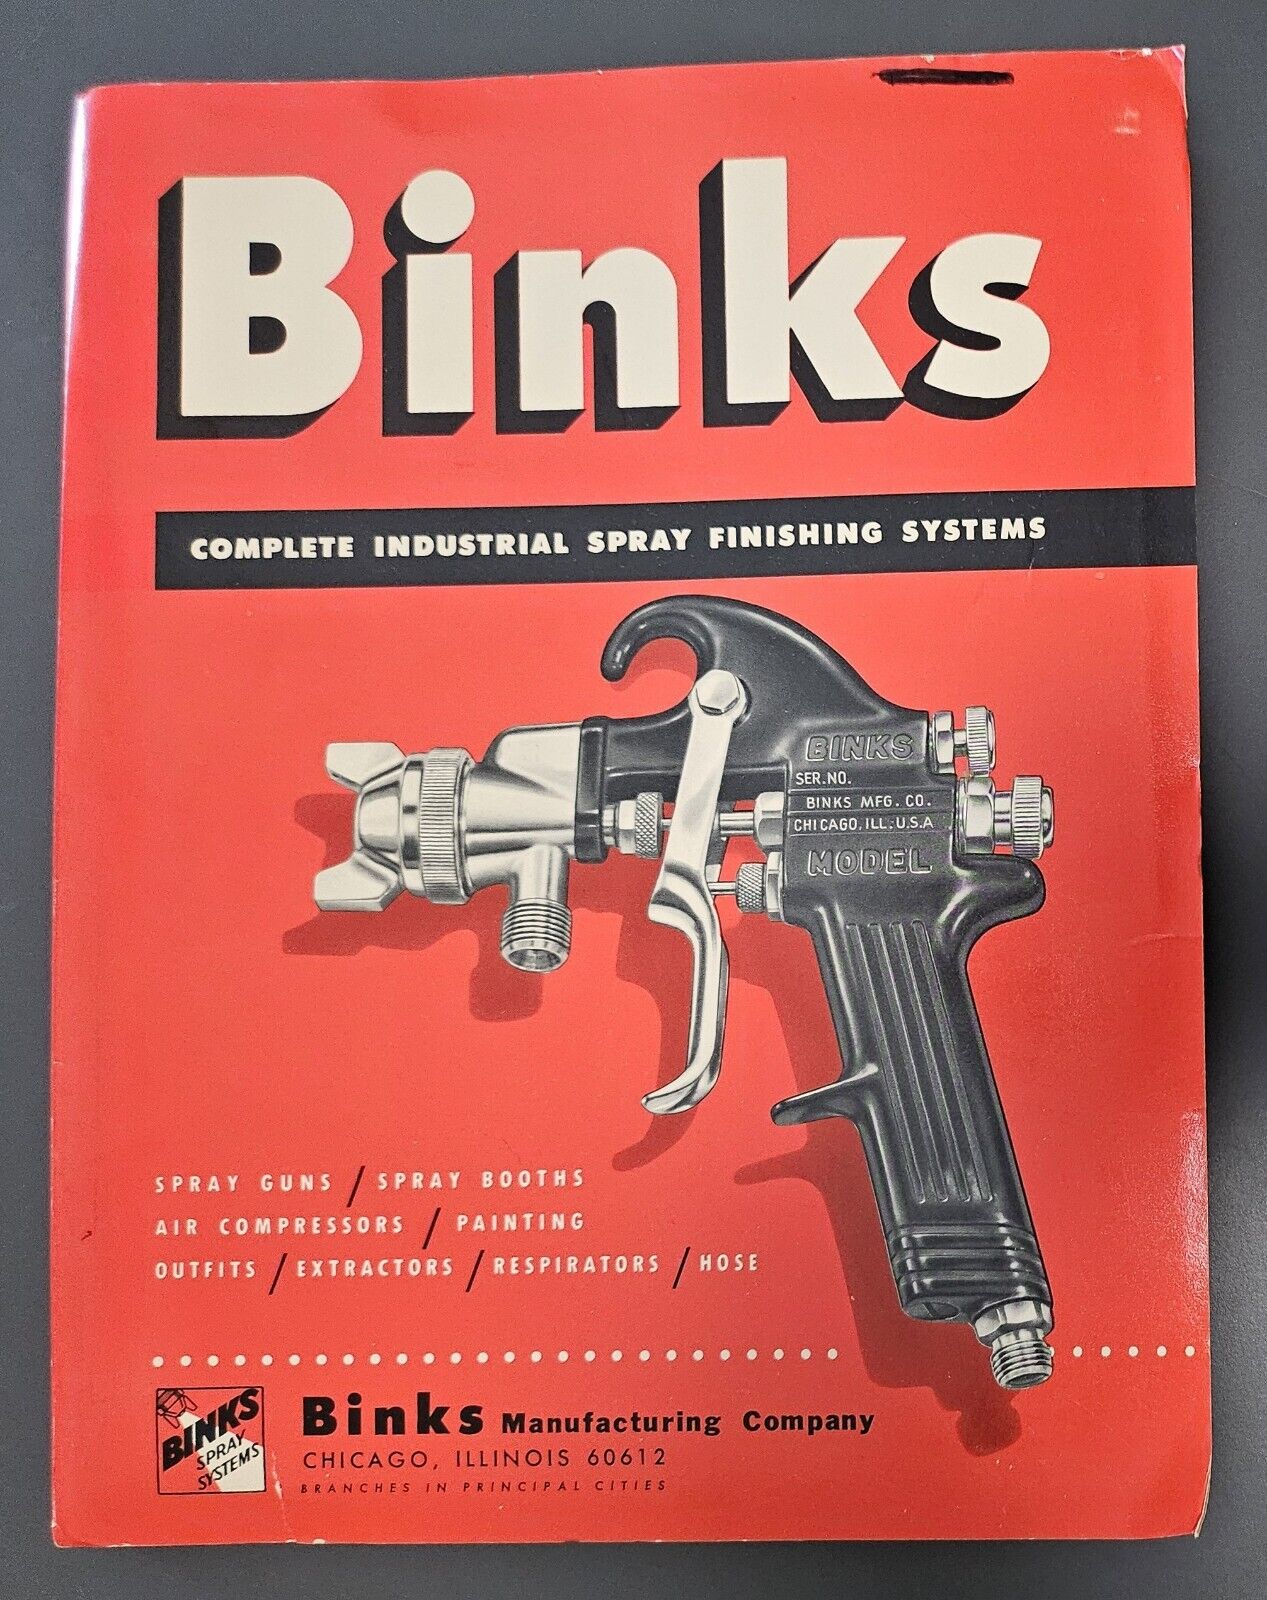 BINKS COMPLETE INDUSTRIAL SPRAY FINISHING SYSTEMS Catalog - VINTAGE 1969